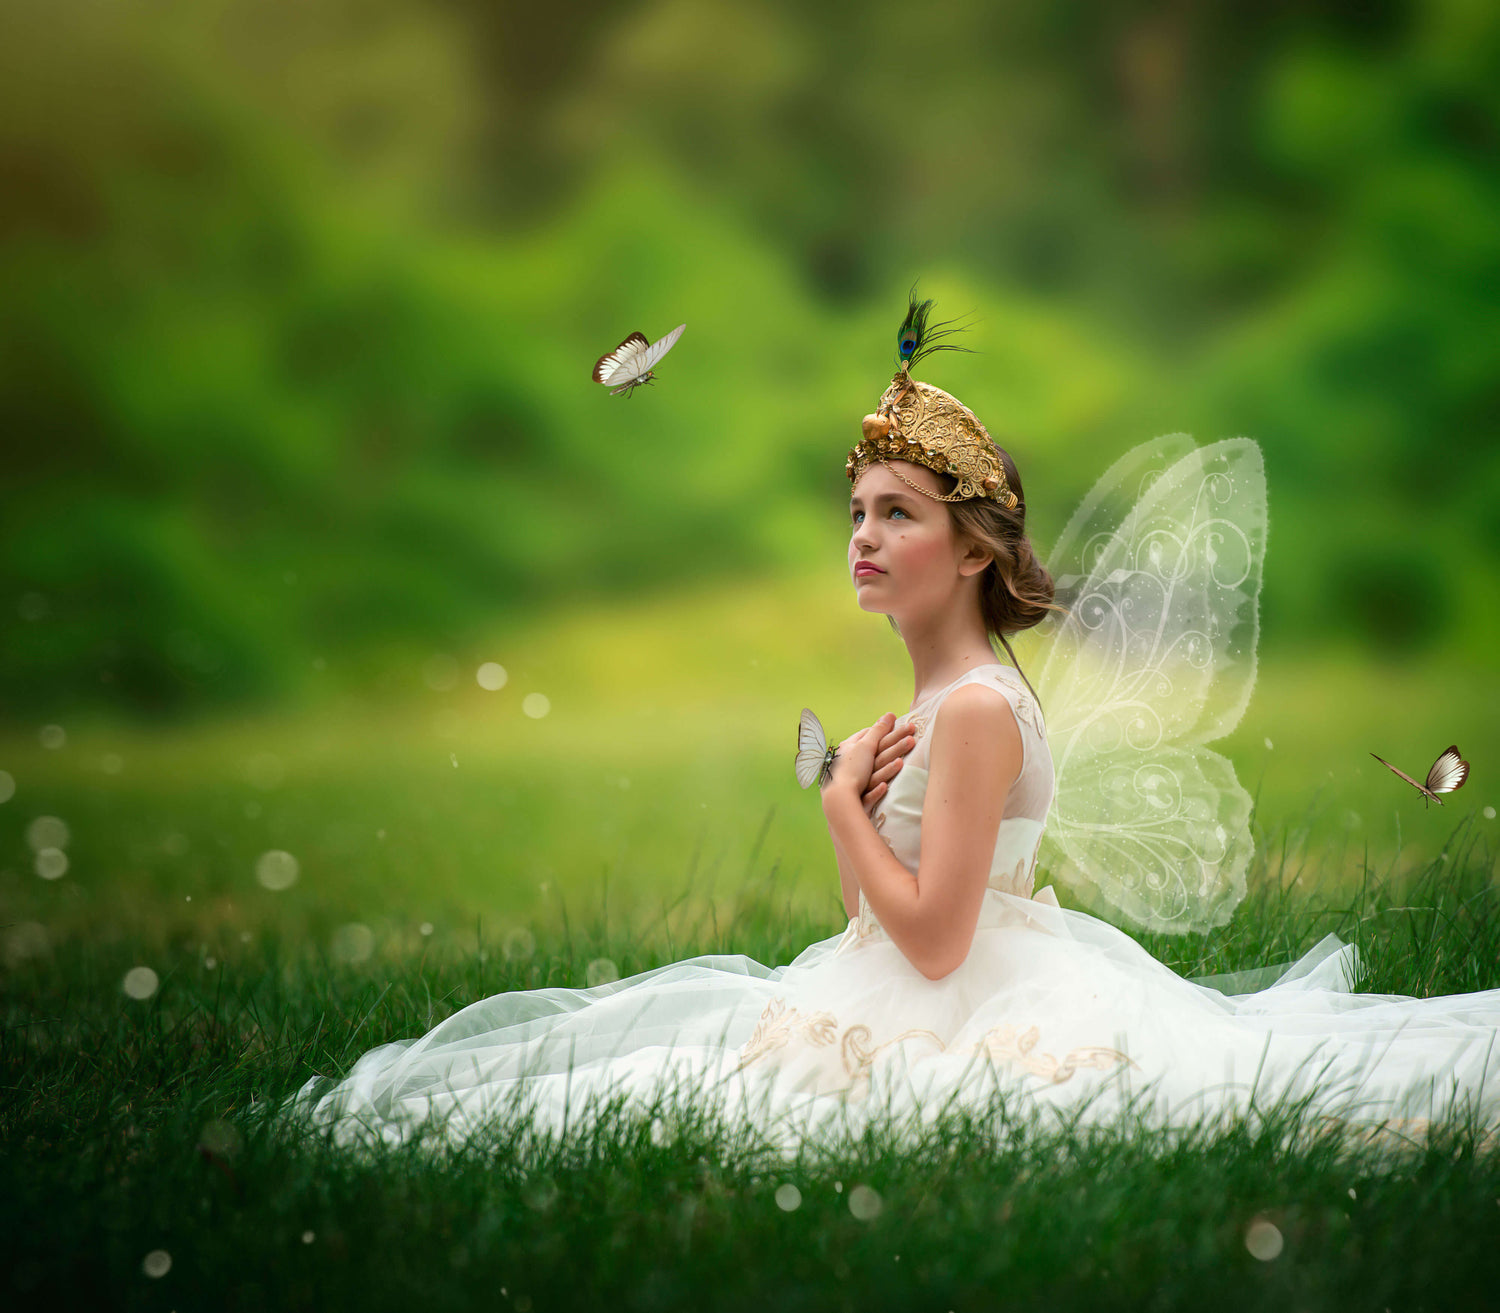 <alt>pretty girl sitting down on the grass wearing a white lace dress and gold greek goddess headpiece looking at butterflies</alt>